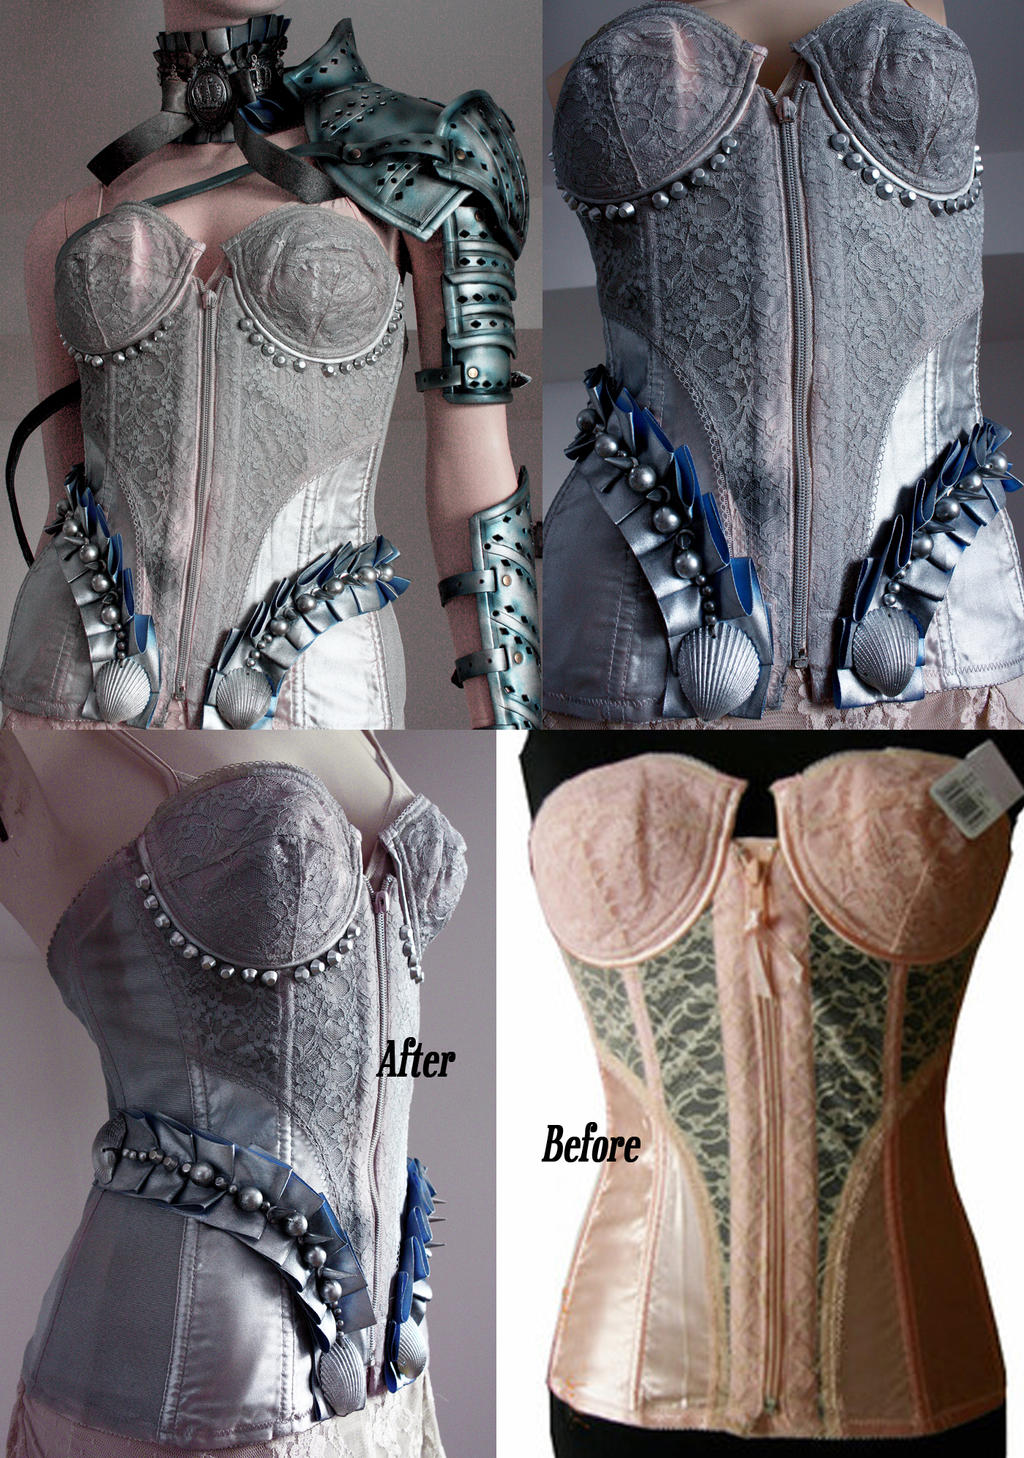 Before and After corset re-styling by Pinkabsinthe on DeviantArt